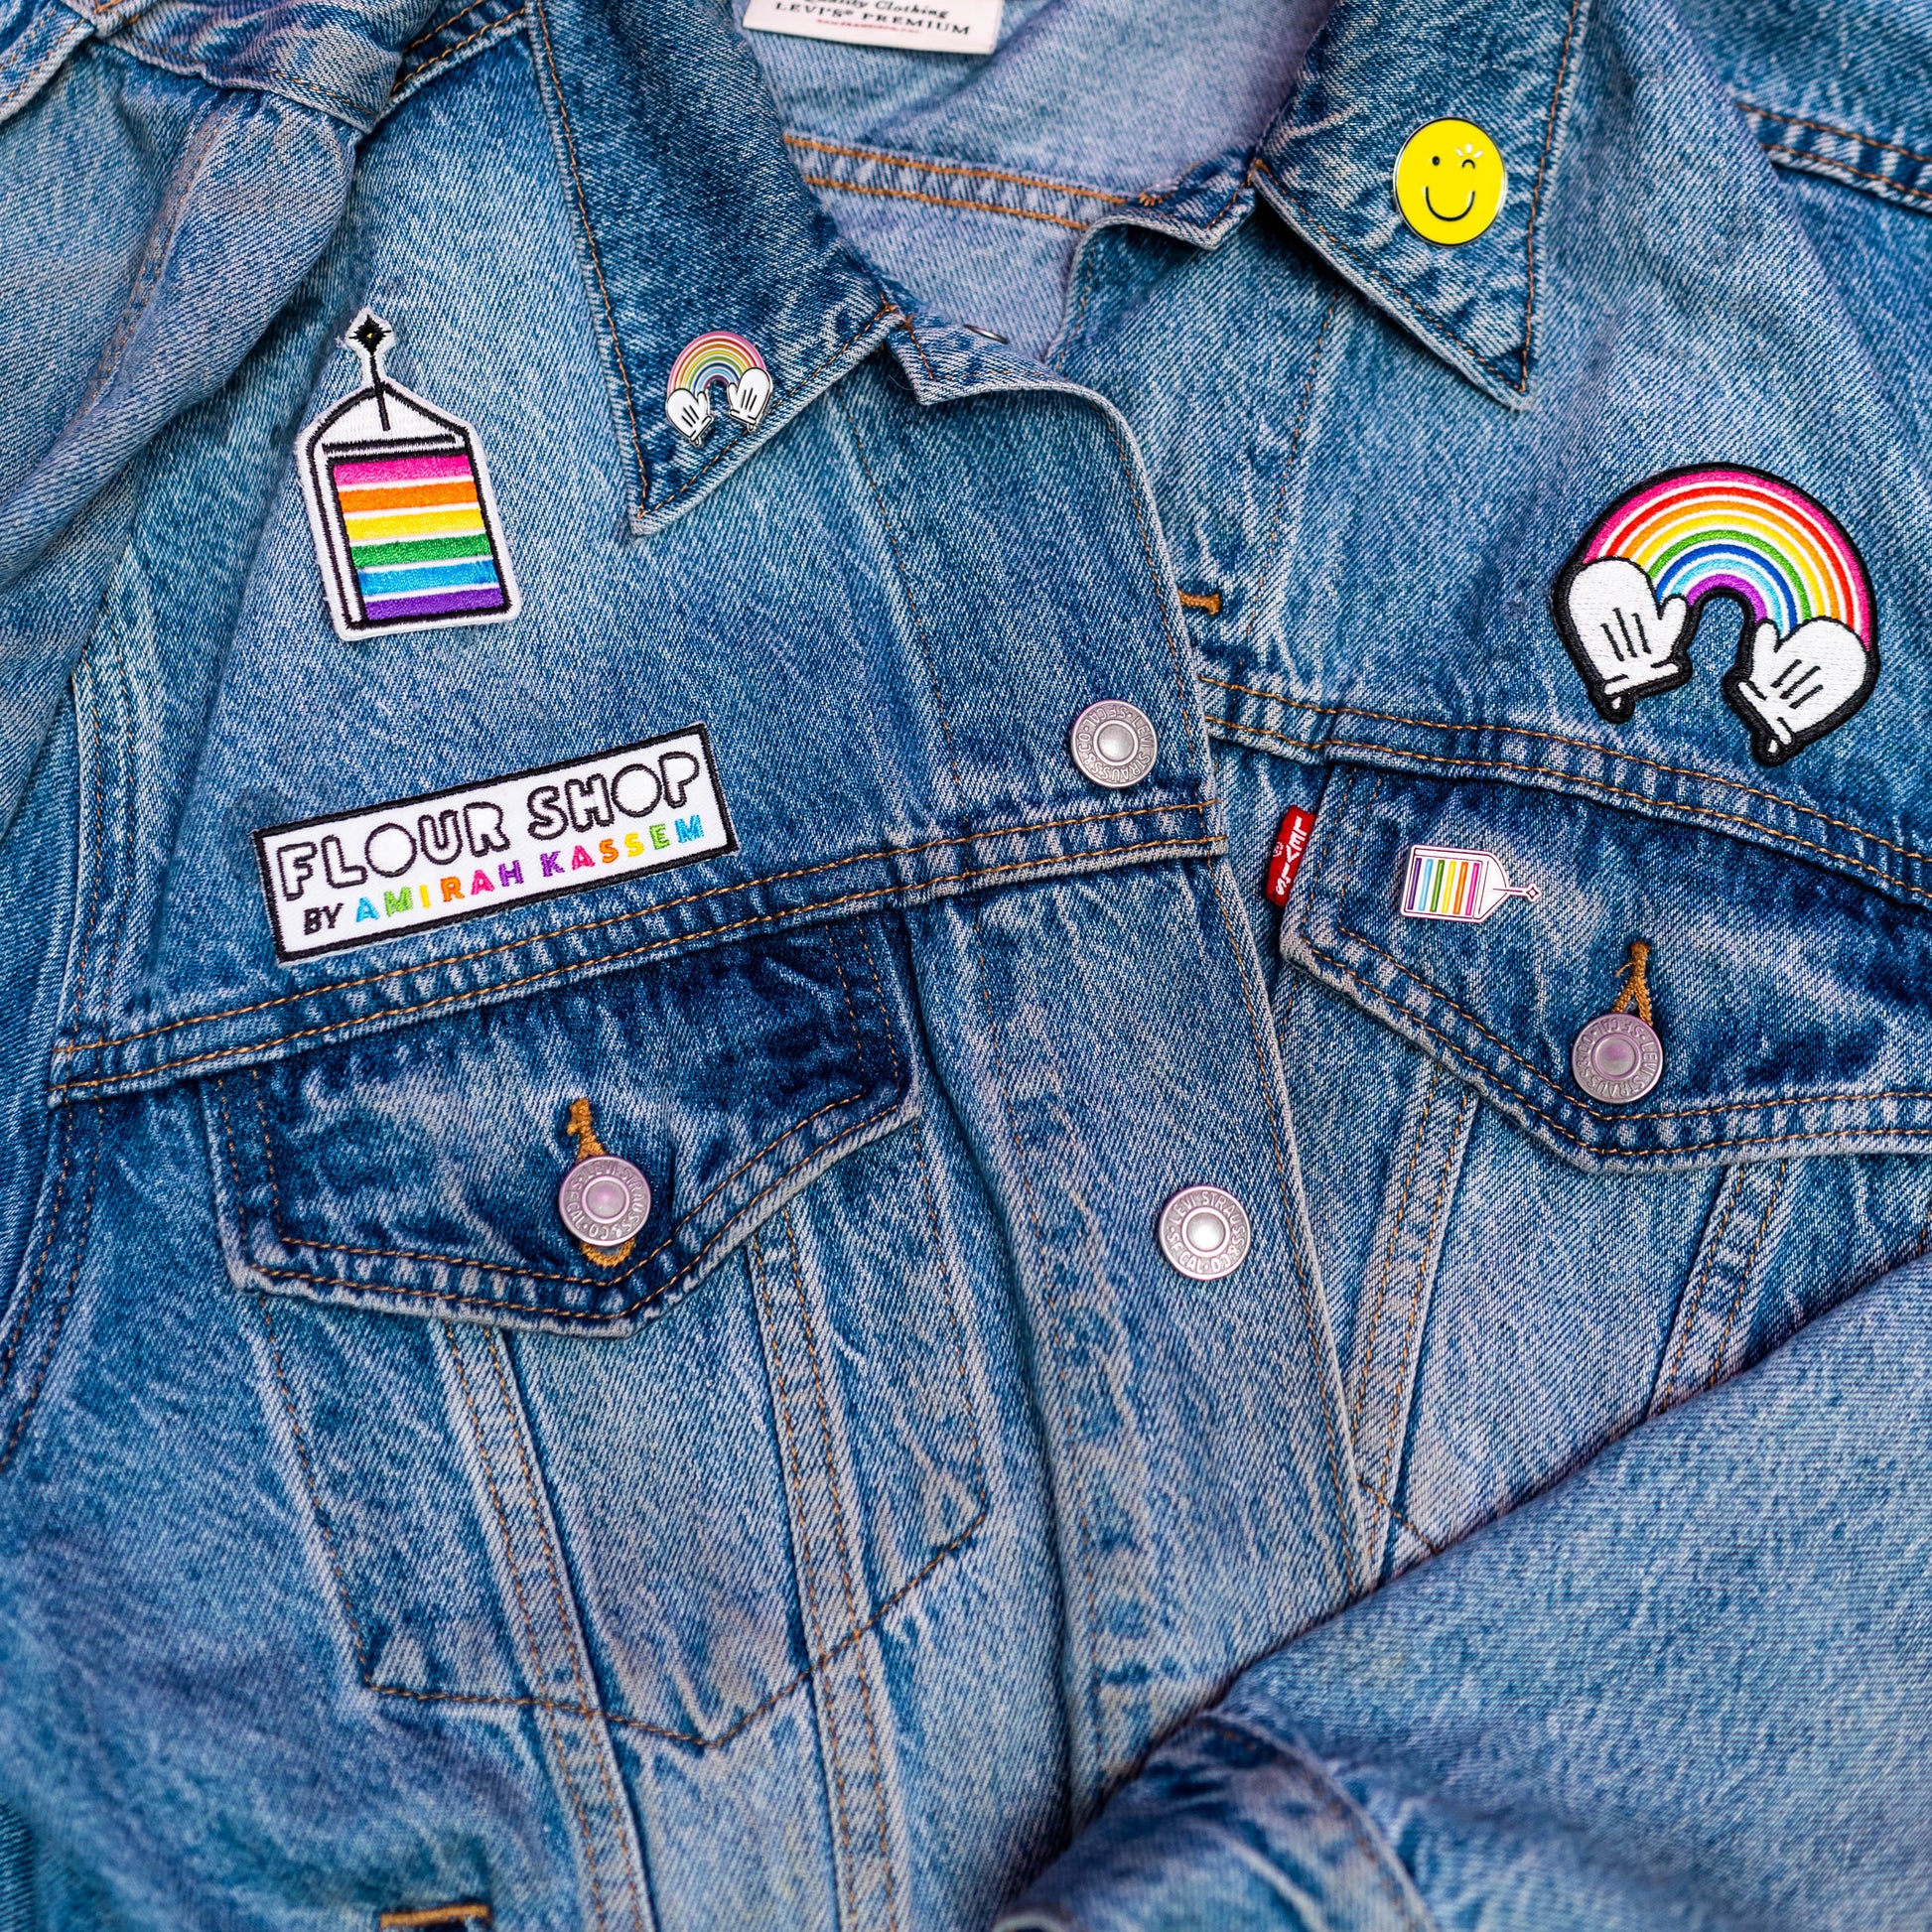 Denim Jacket with Flour Shop Patches and Pins 